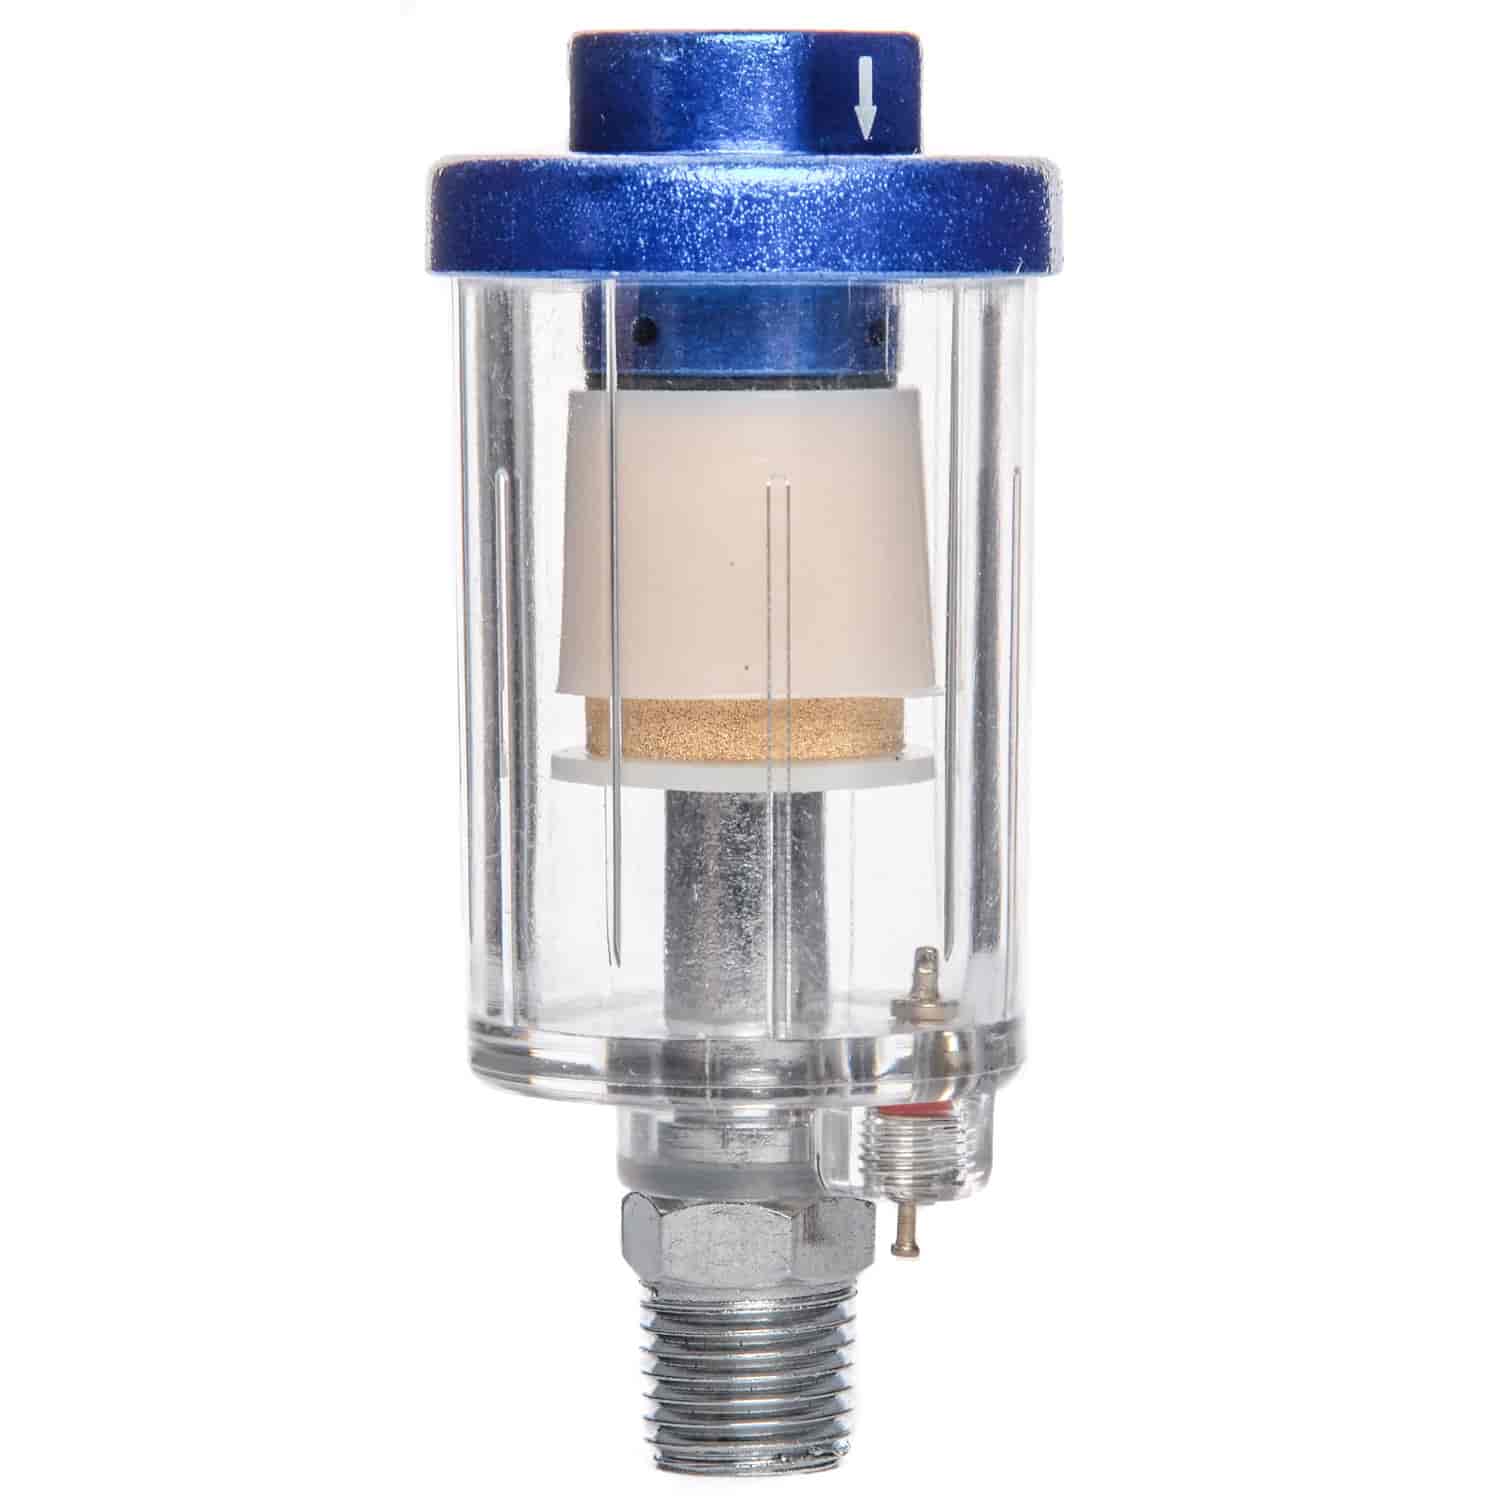 Airline Oil & Water Separator Removes oil & water from air supply